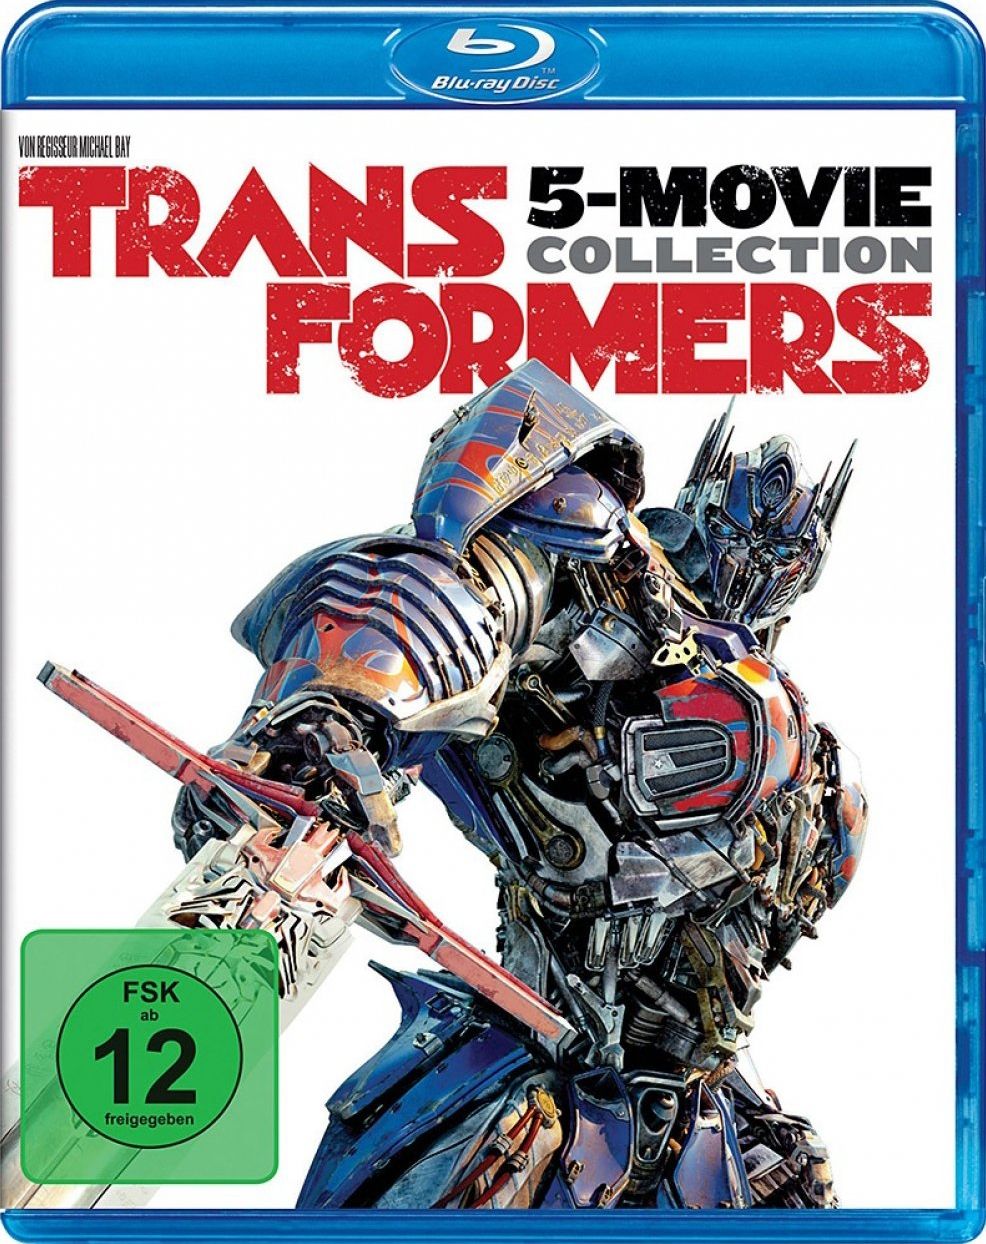 Transformers 1-5 Collection (5 Discs) (BLURAY)